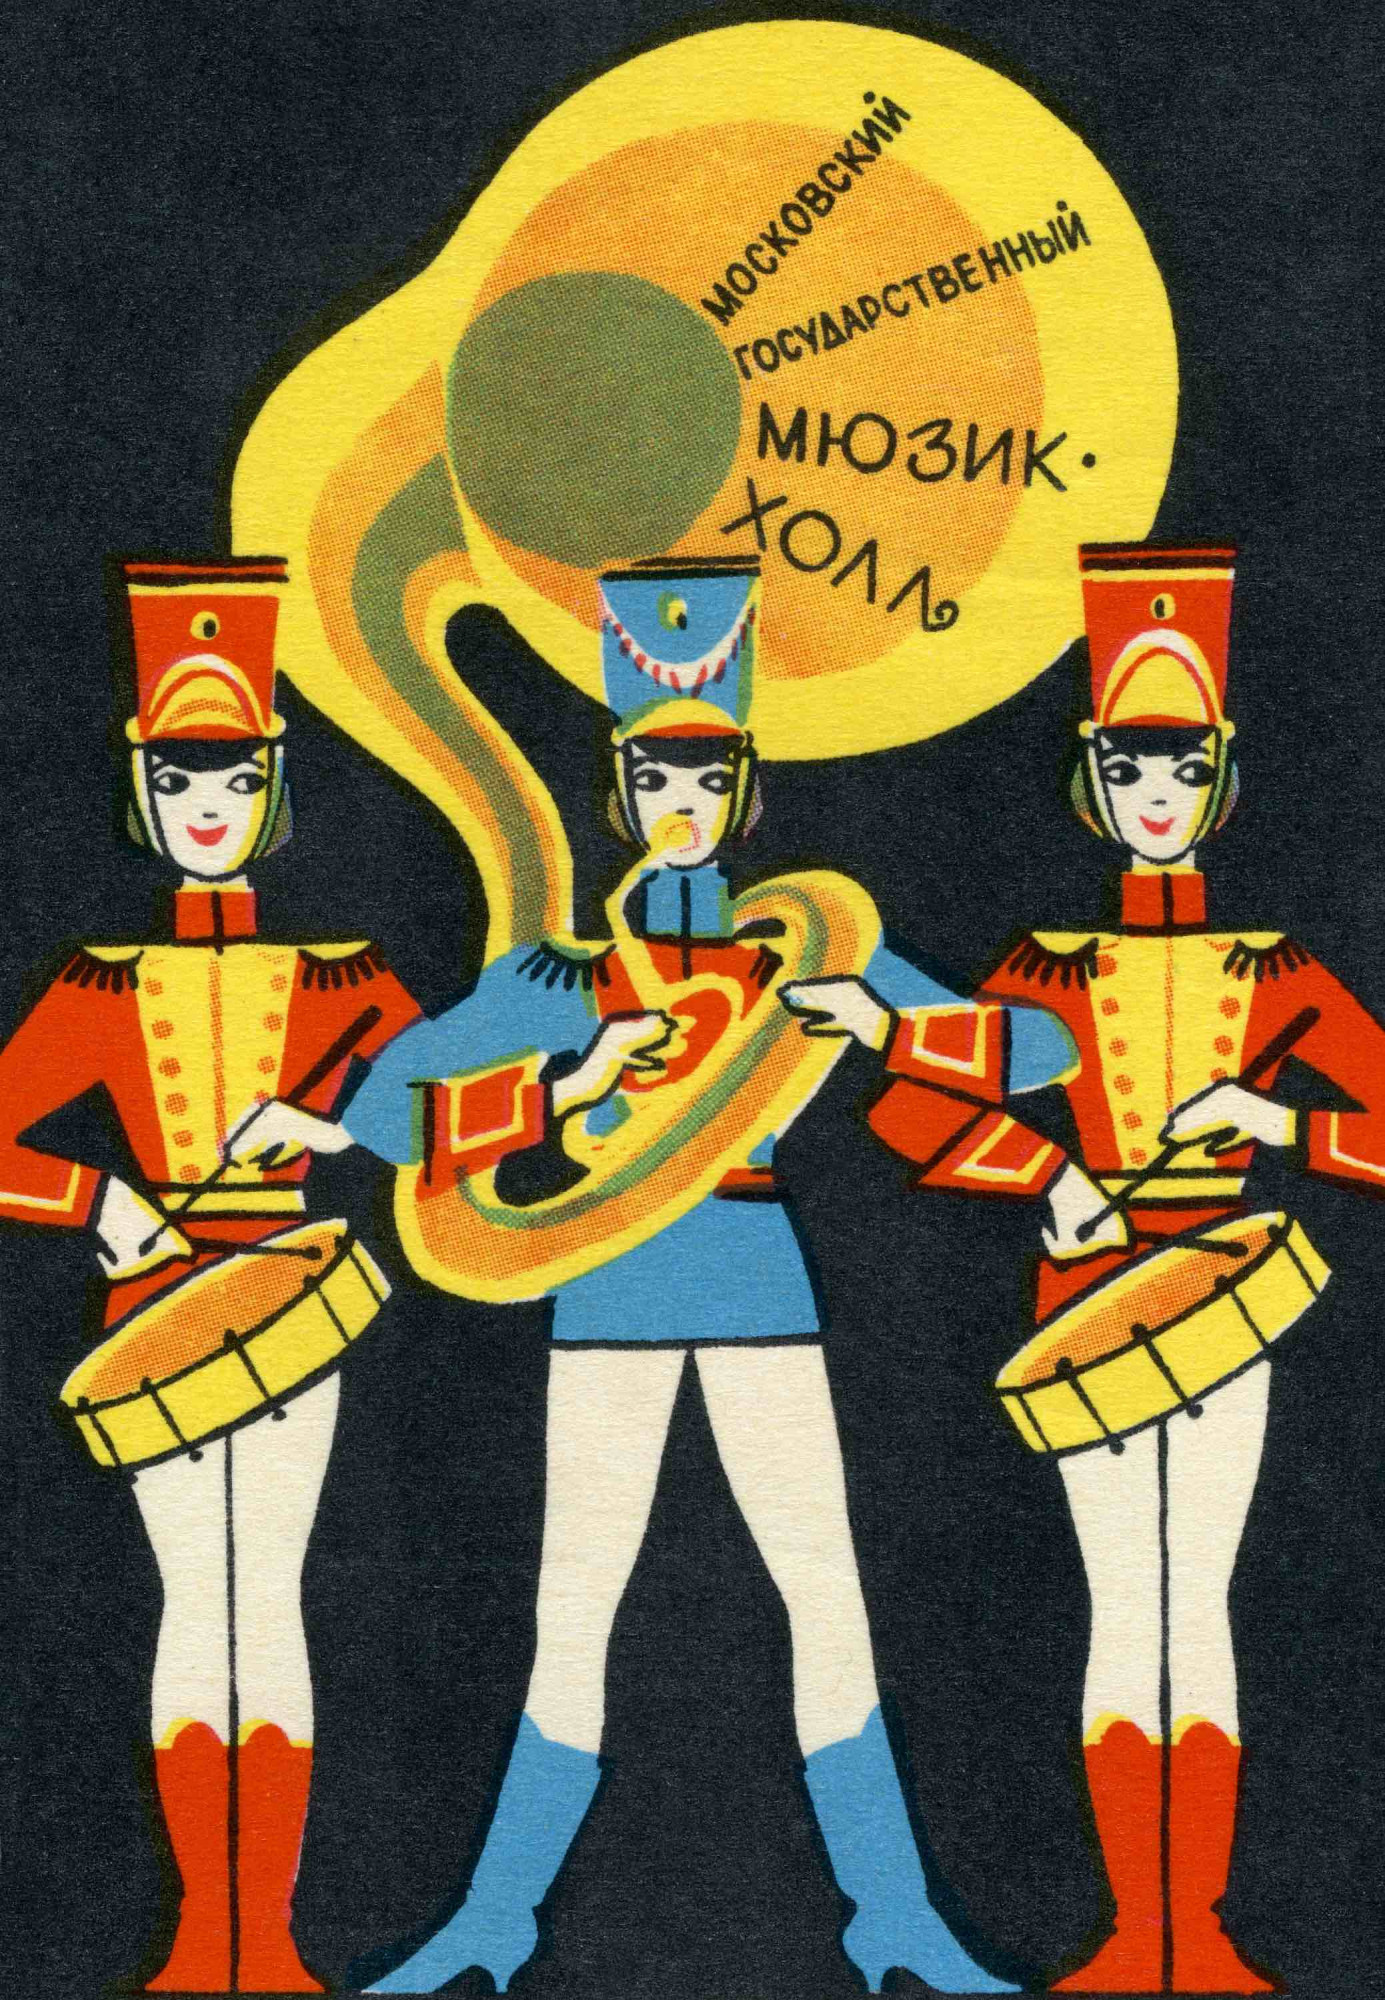 Marching band, Russia, 1968